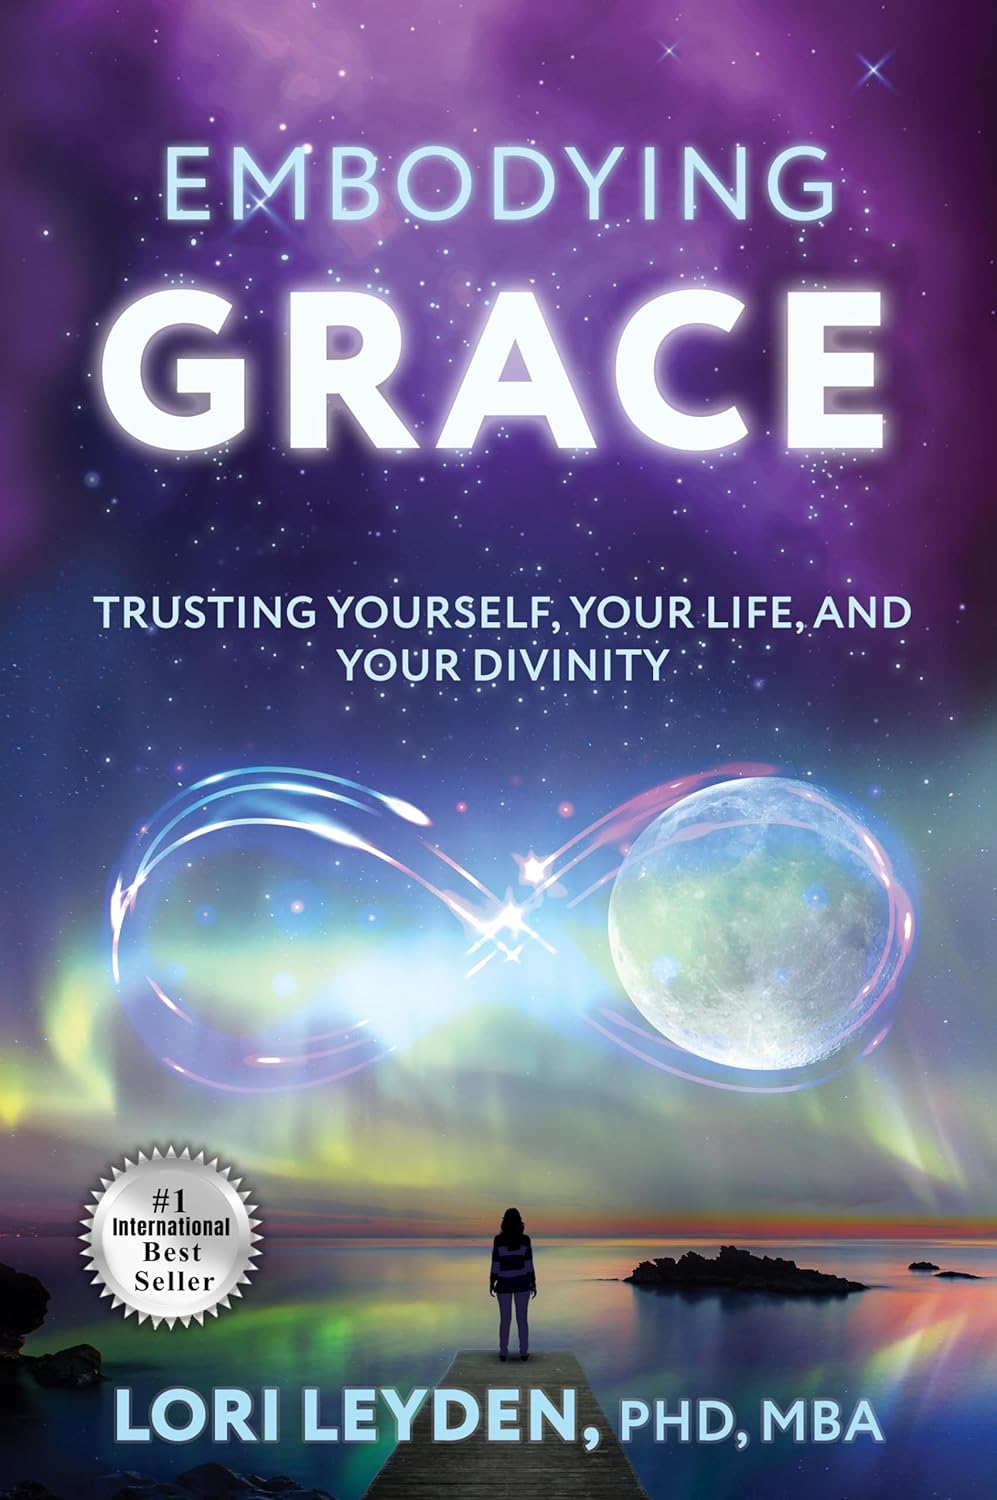 Dr. Lori Leyden’s Book, Embodying Grace, Becomes #1 International Bestseller Within Hours of Its Launch